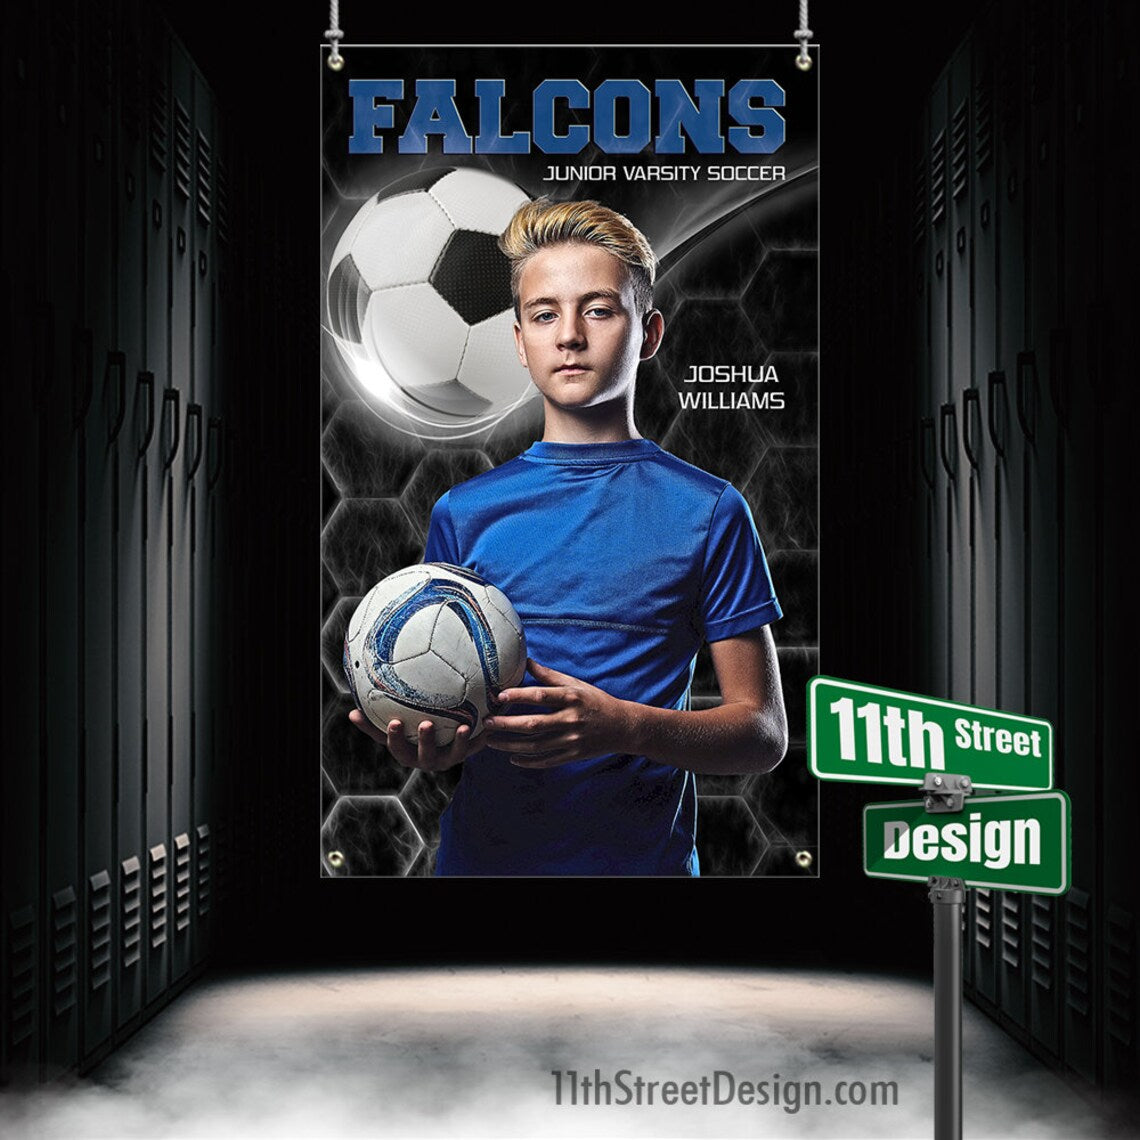 Coaches Gift, Team Gifts, Poster Print, Personalized Poster, Senior Night, Senior Poster, Sport Gift, Sports Collage, Sports Prints, Custom Sports Poster, Soccer Poster, Soccer Print, Soccer Senior